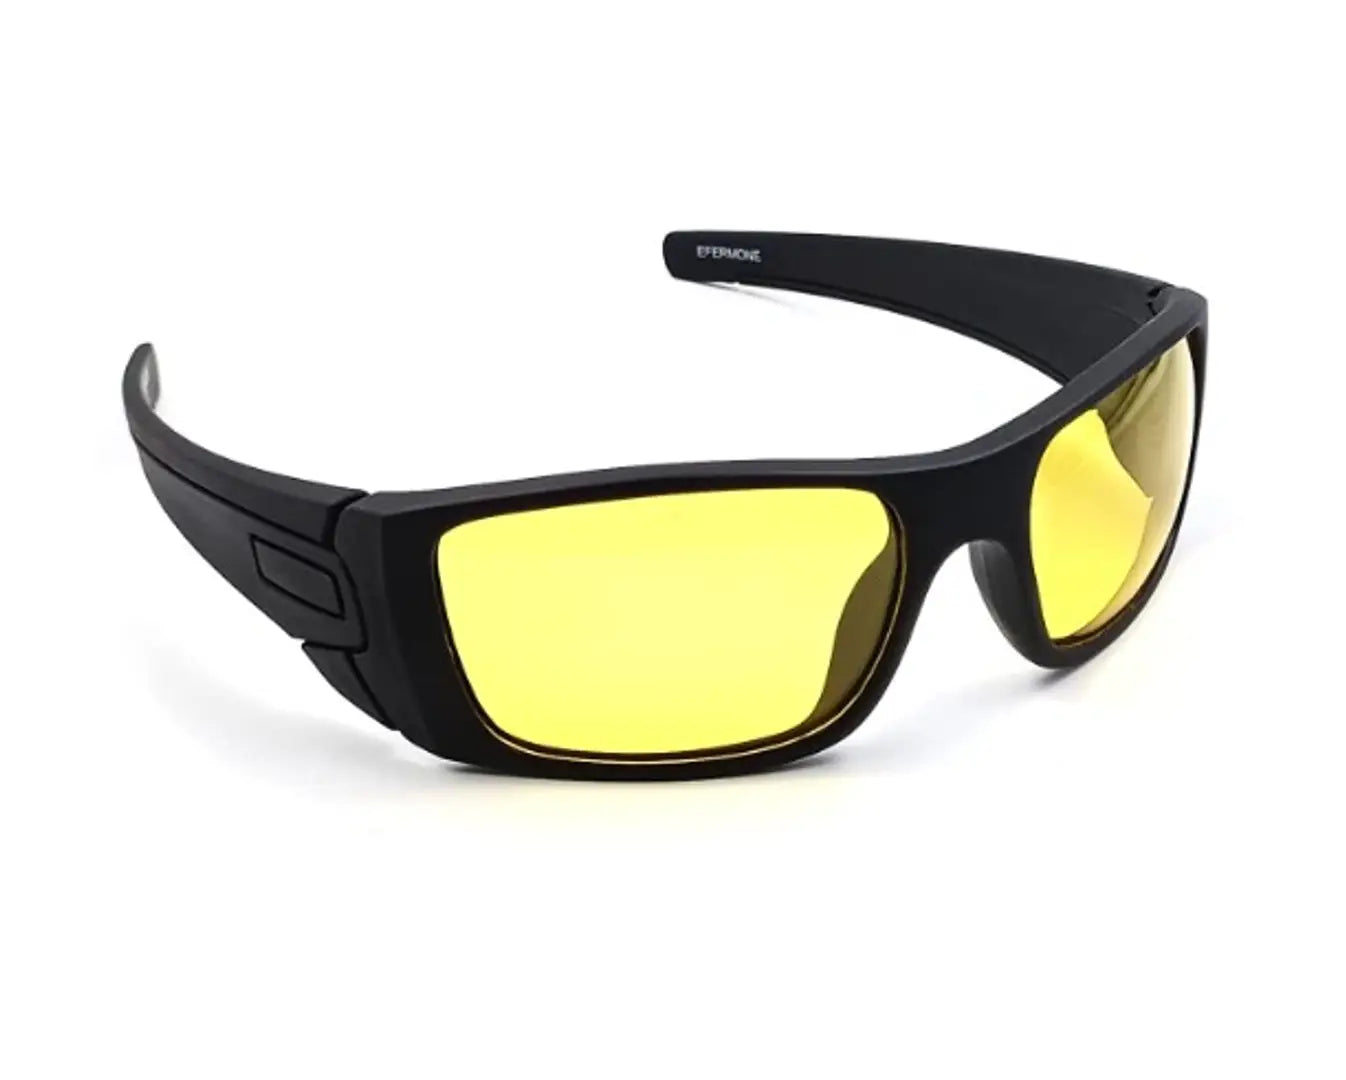 Night Driving Clear Vision Polarized Sunglasses | HD Vision Glasses For Car Driving | Bike Riding Yellow Glasses